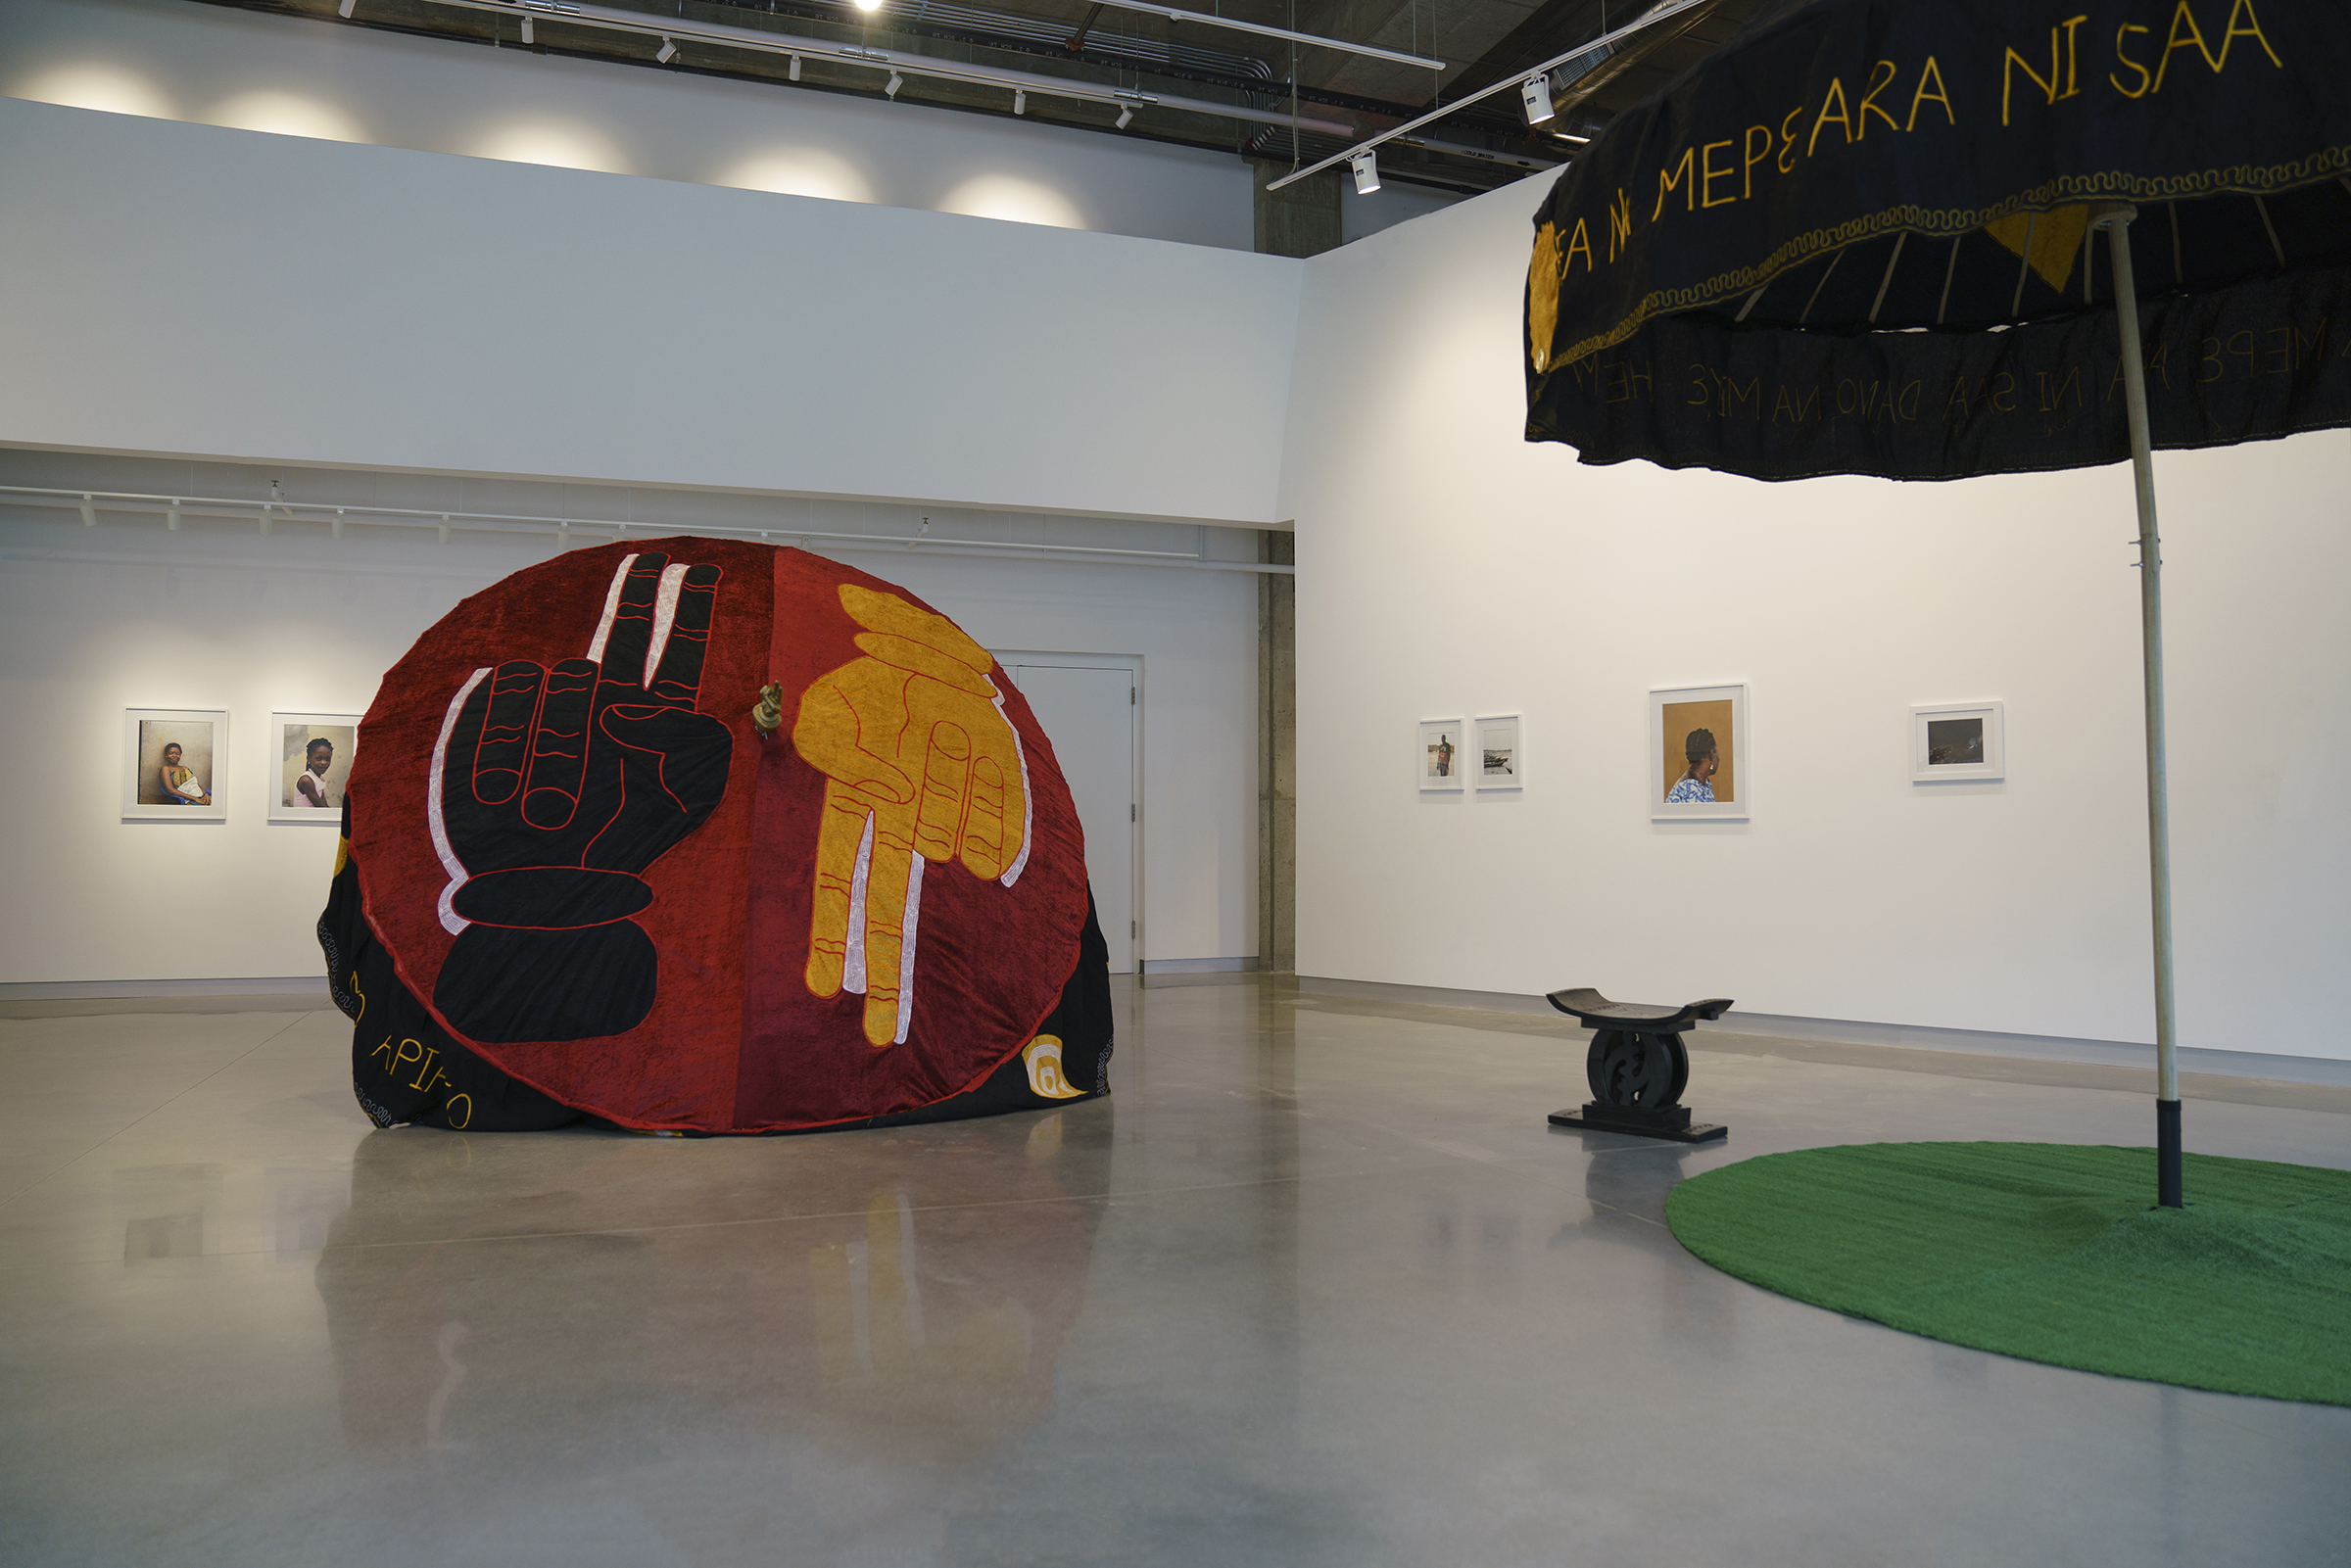 Installation view of Mo Apiafo by Rita Mawuena Benissan at the Arts + Literature Laboratory, photography by Ali Deane.